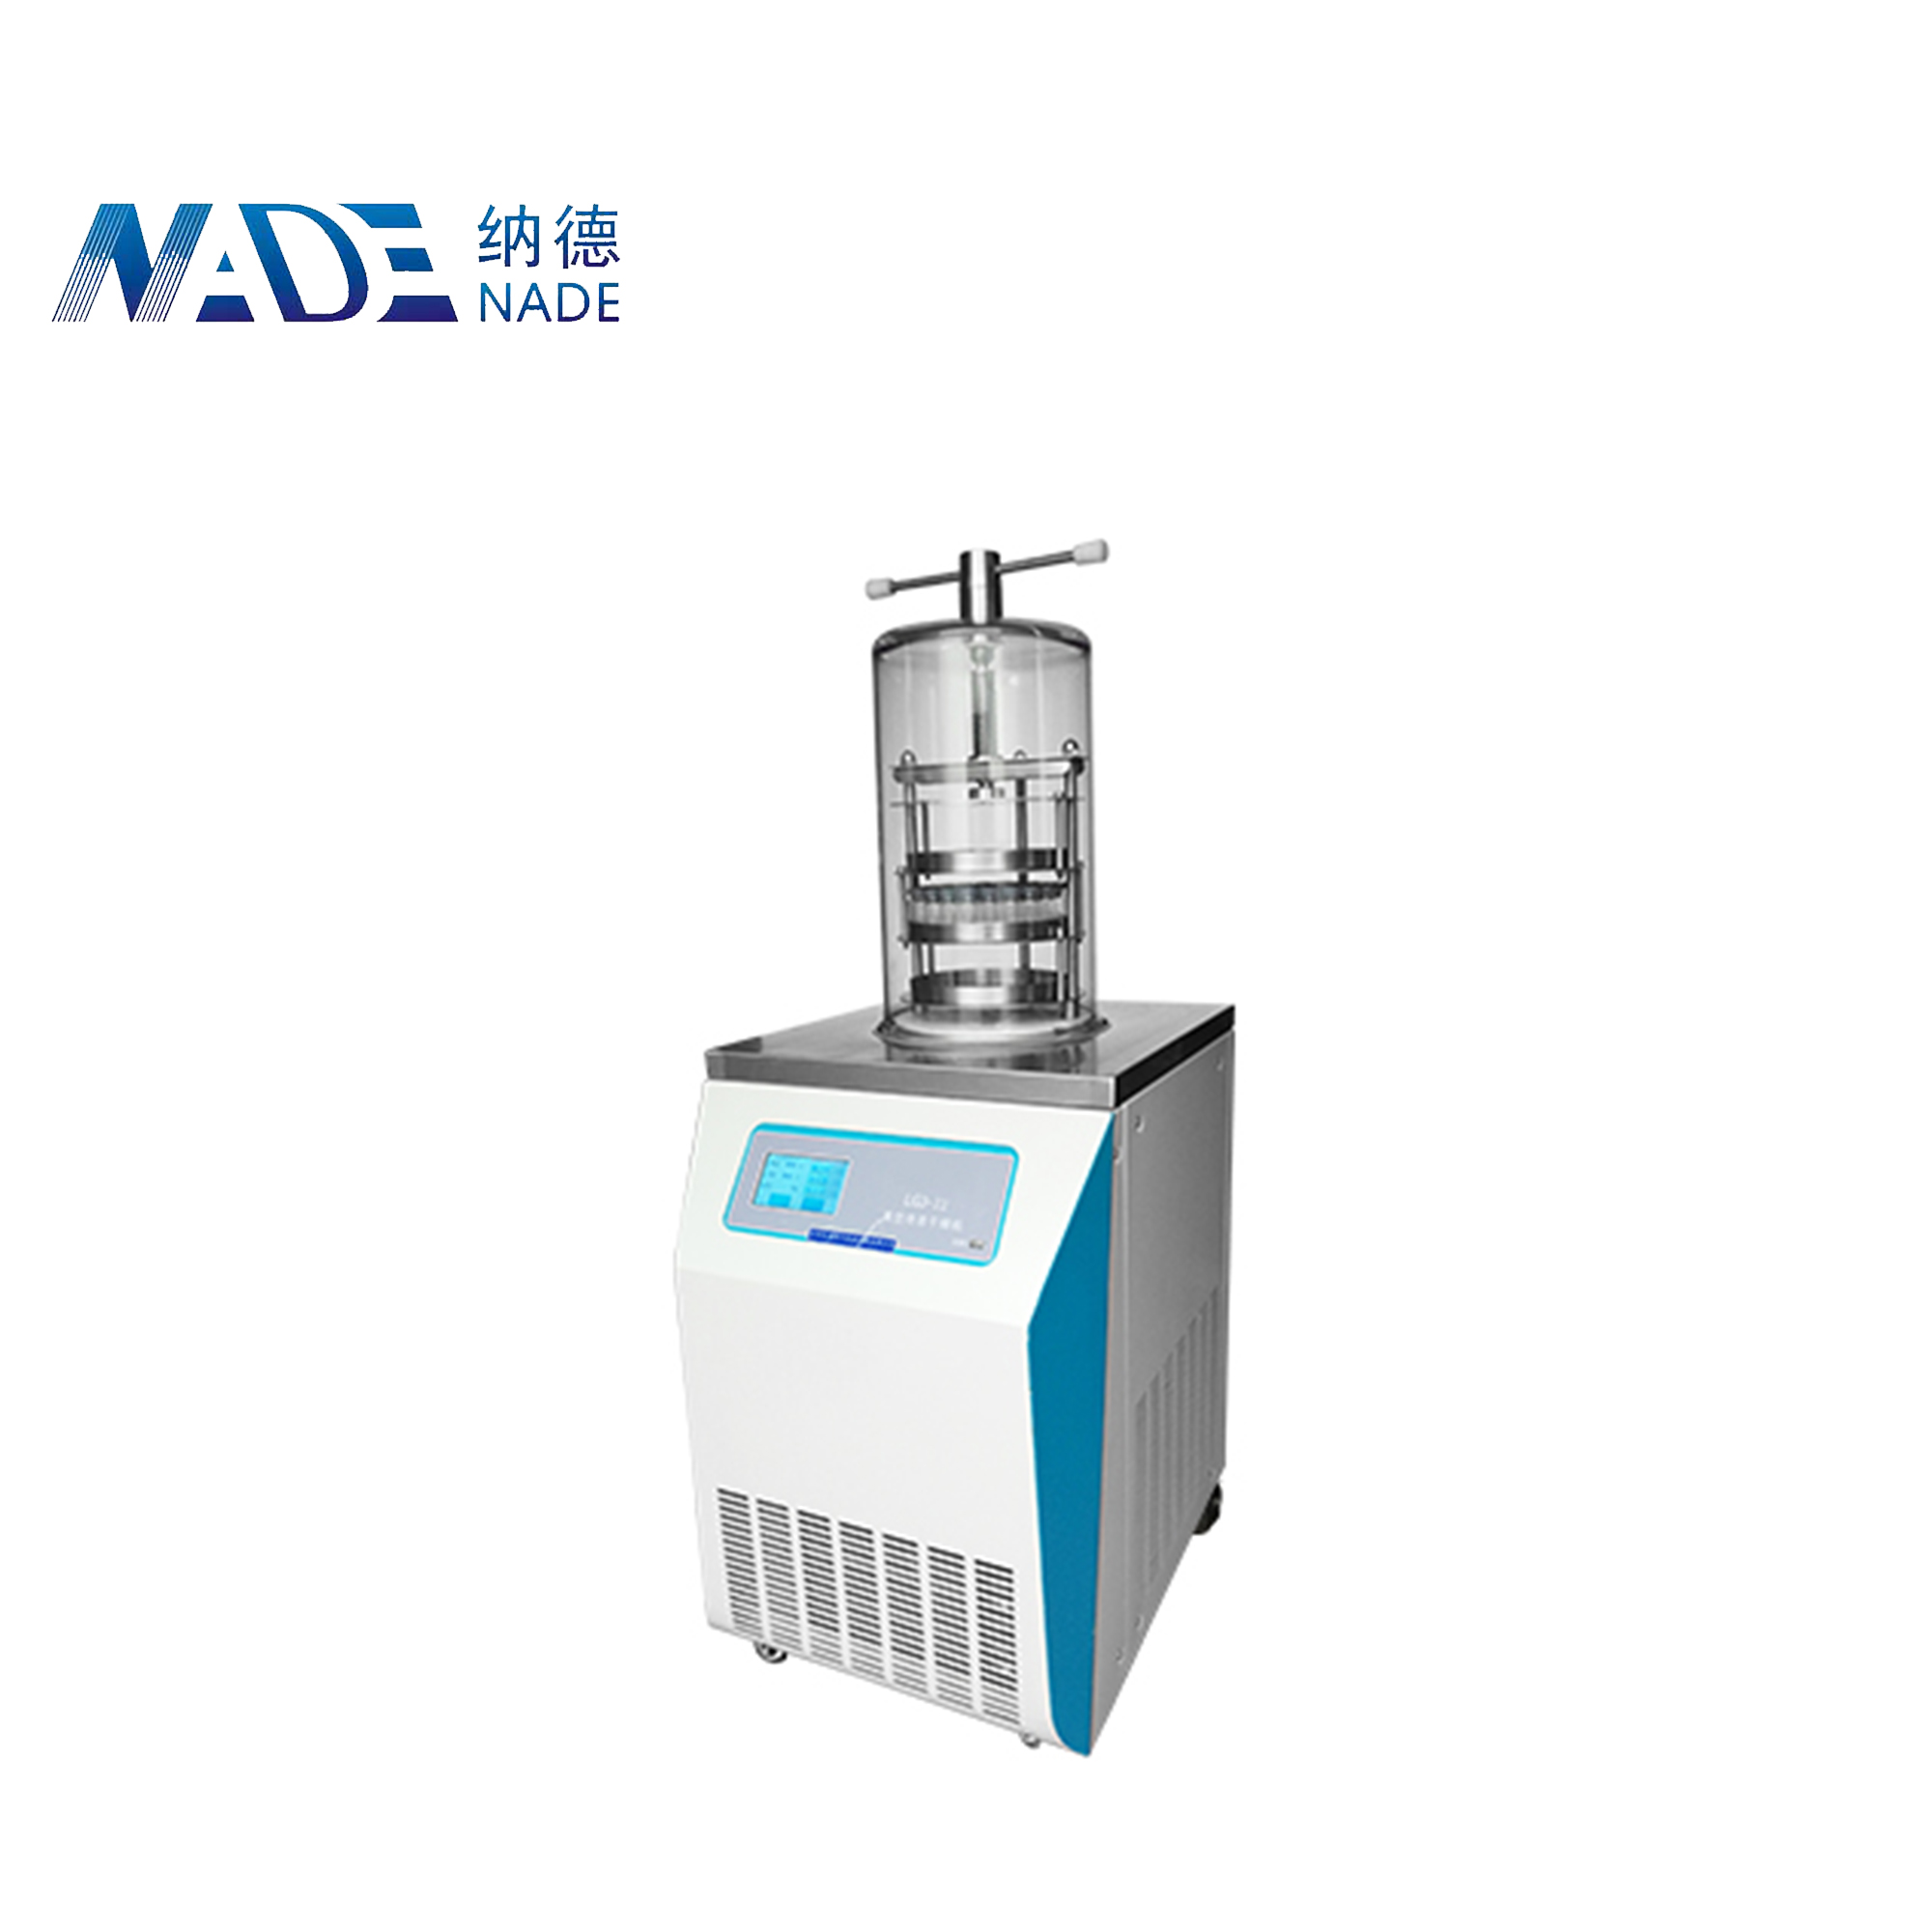 NADE LGJ-12B Top Press Type Lab Lyophilizer/freeze drying equipment/freeze dryer for liquid, pasty, solid and he vials materials